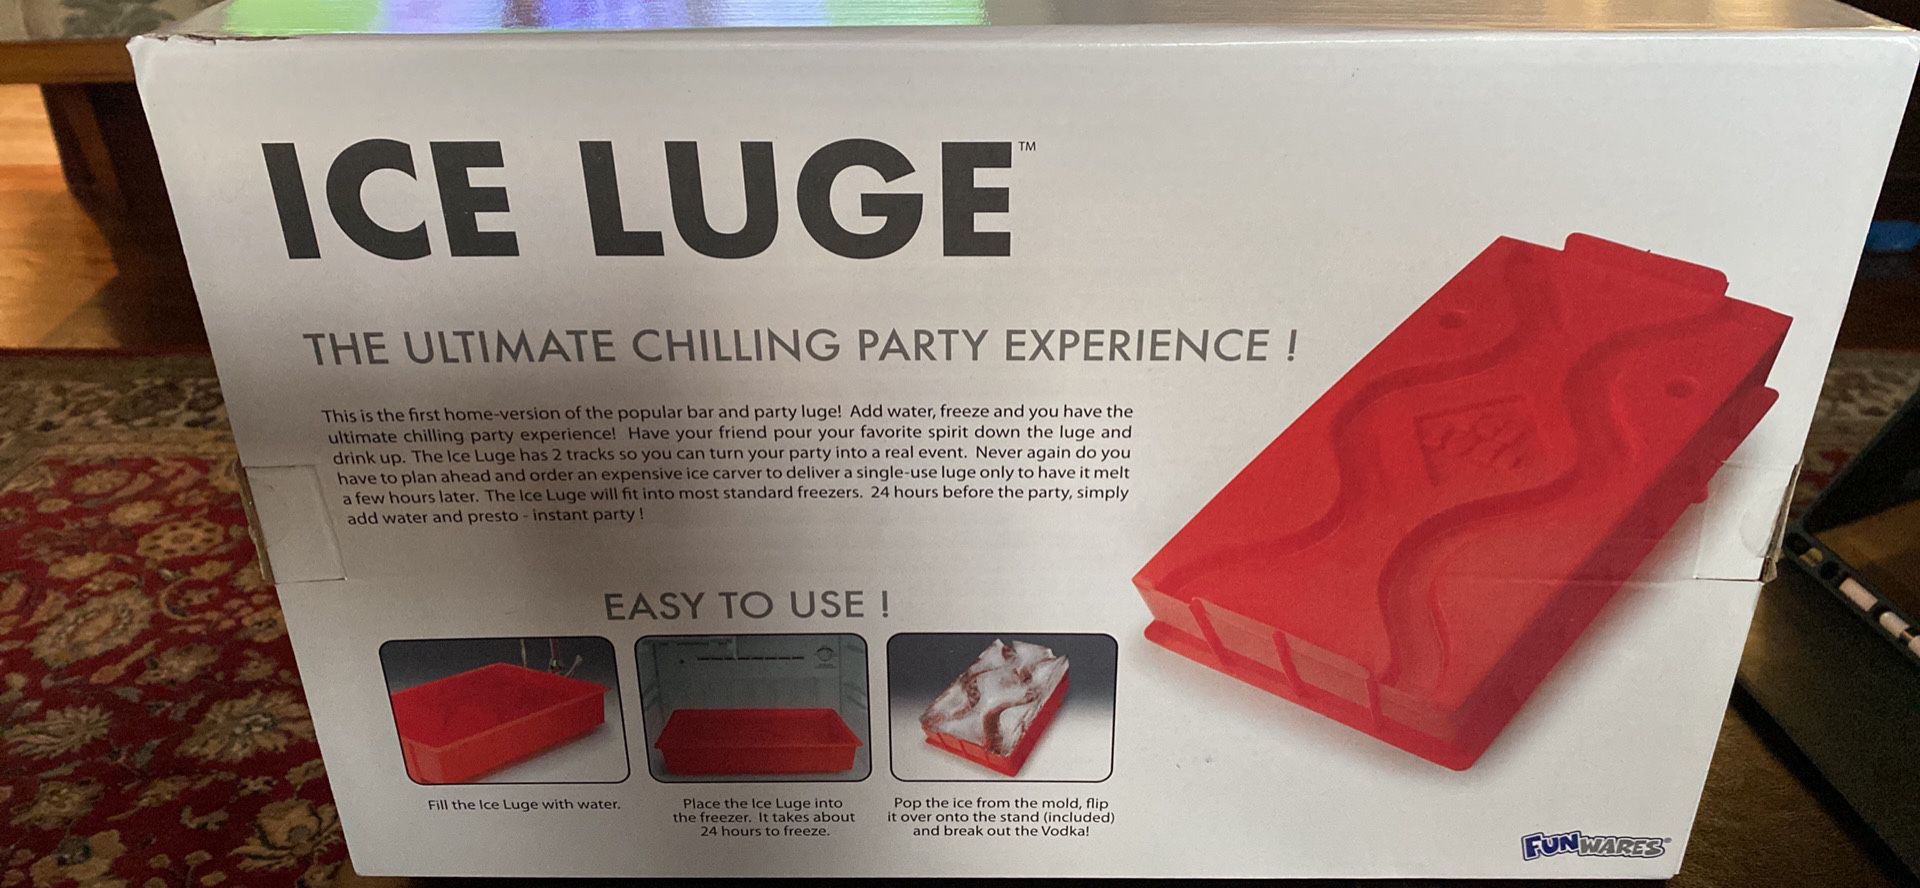 Brand Warranty And Best Deals on Ice Luge Mold 